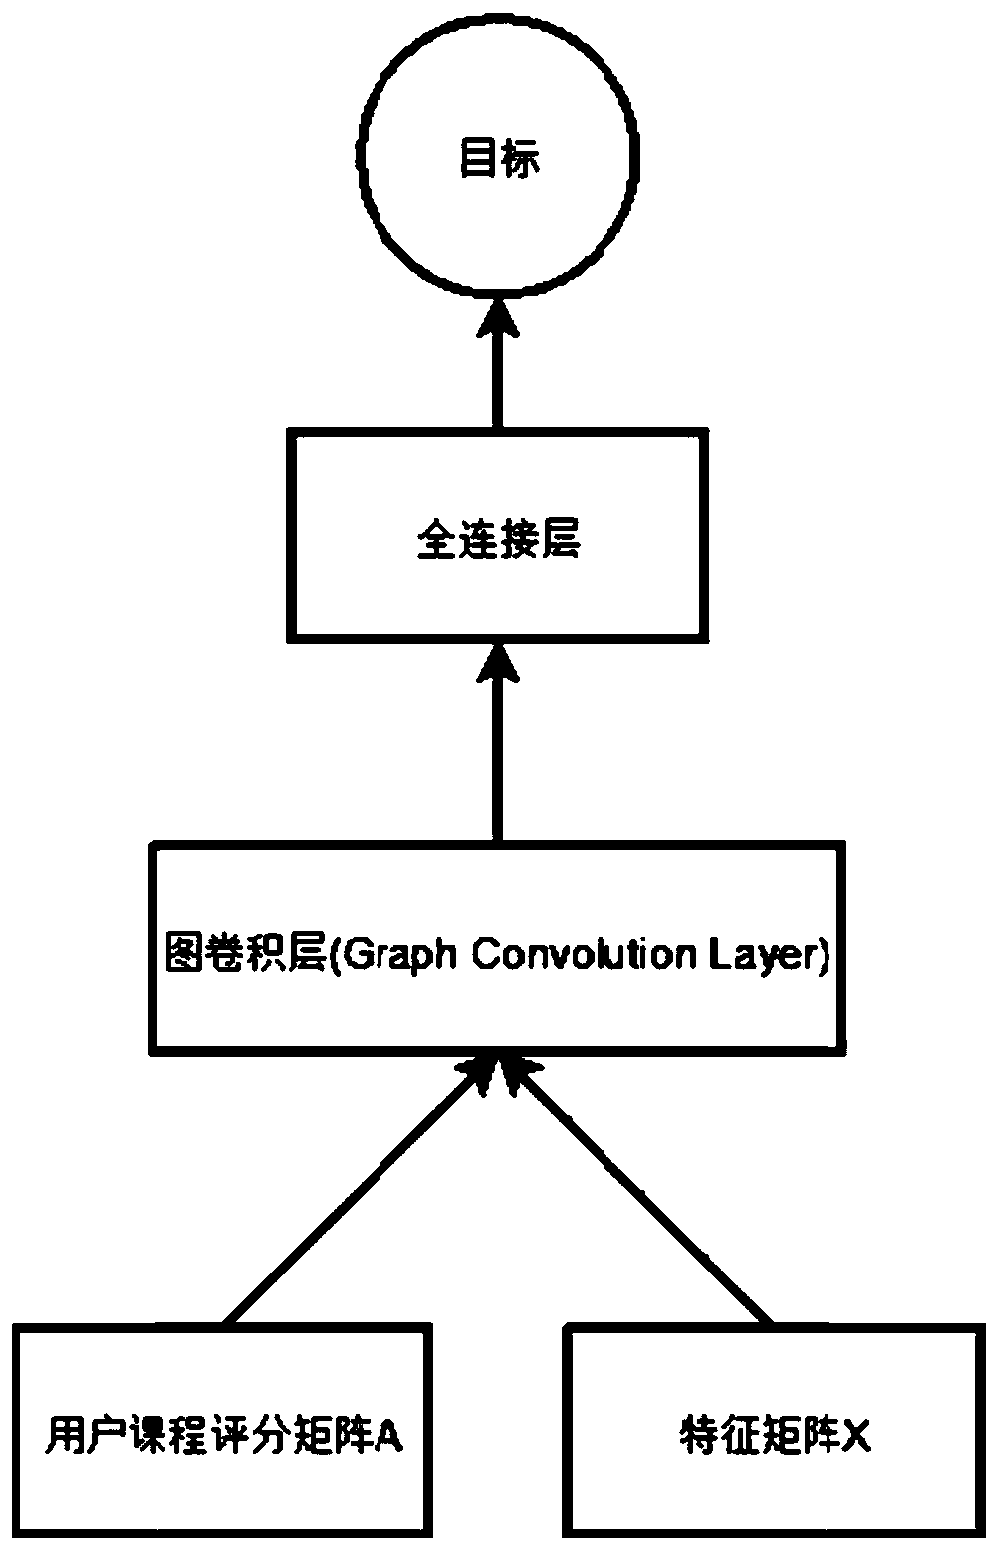 Course recommendation method and system based on graph convolutional neural network and dynamic weights